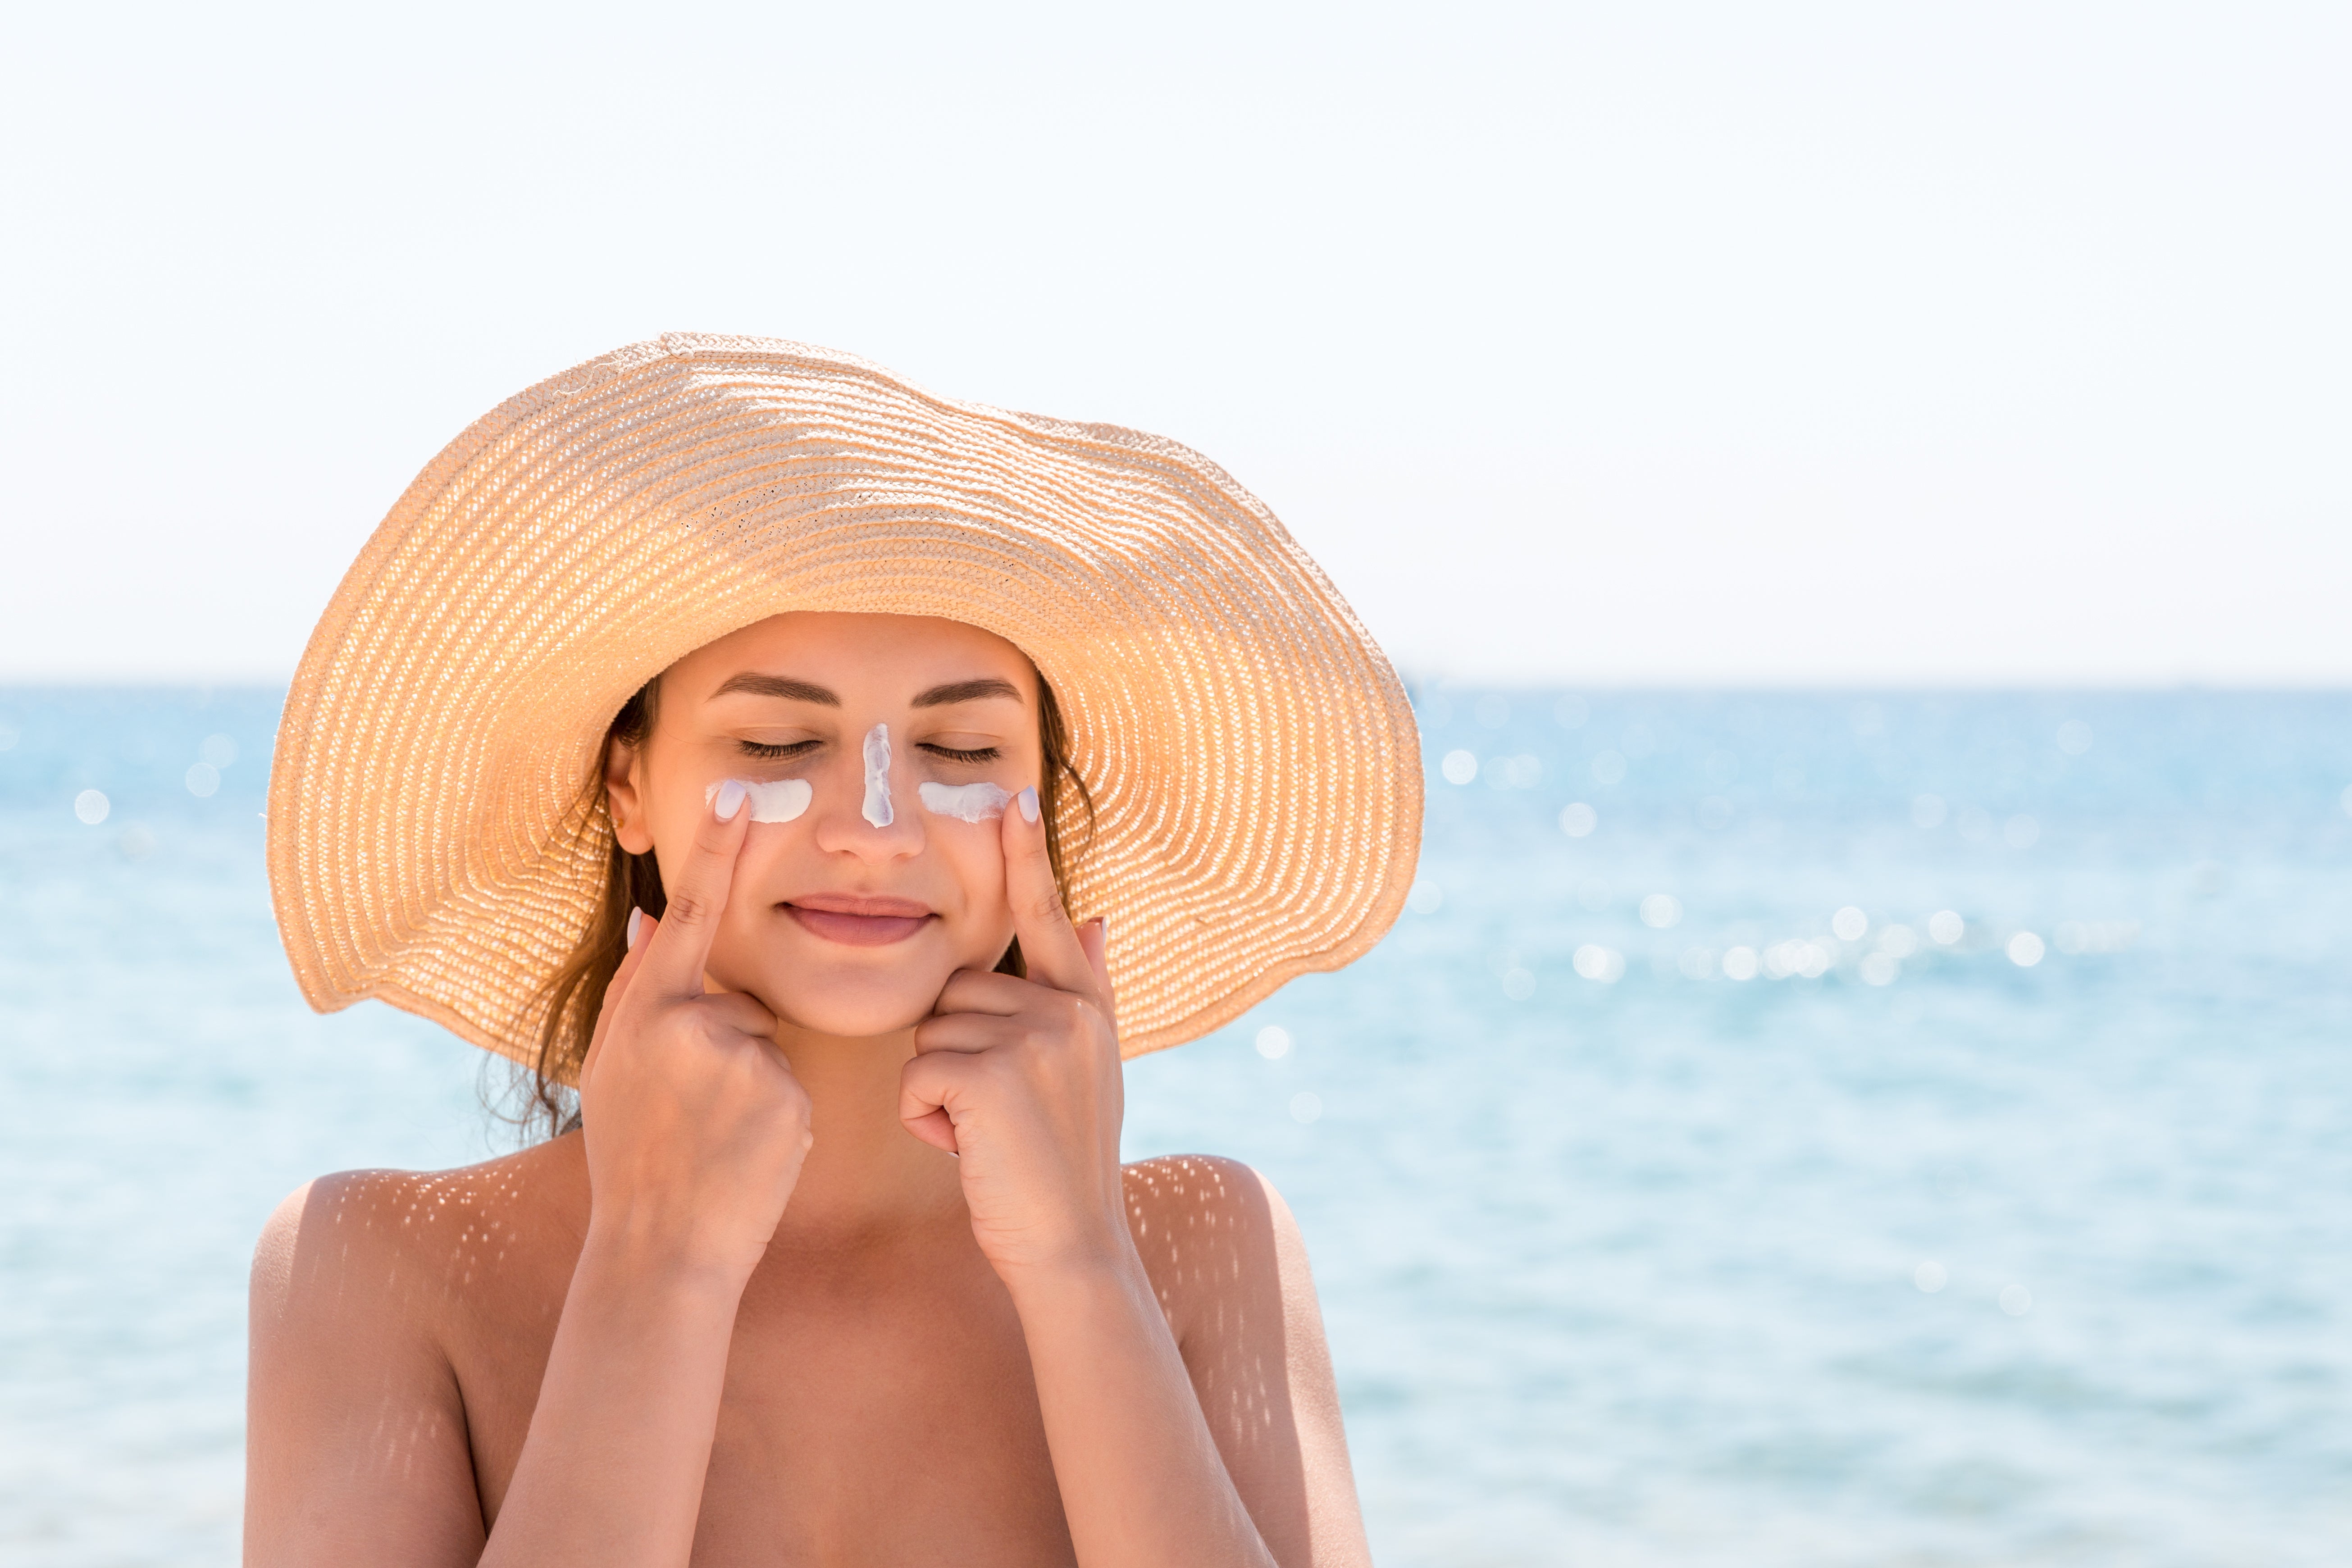 What to wear to protect your skin from the sun